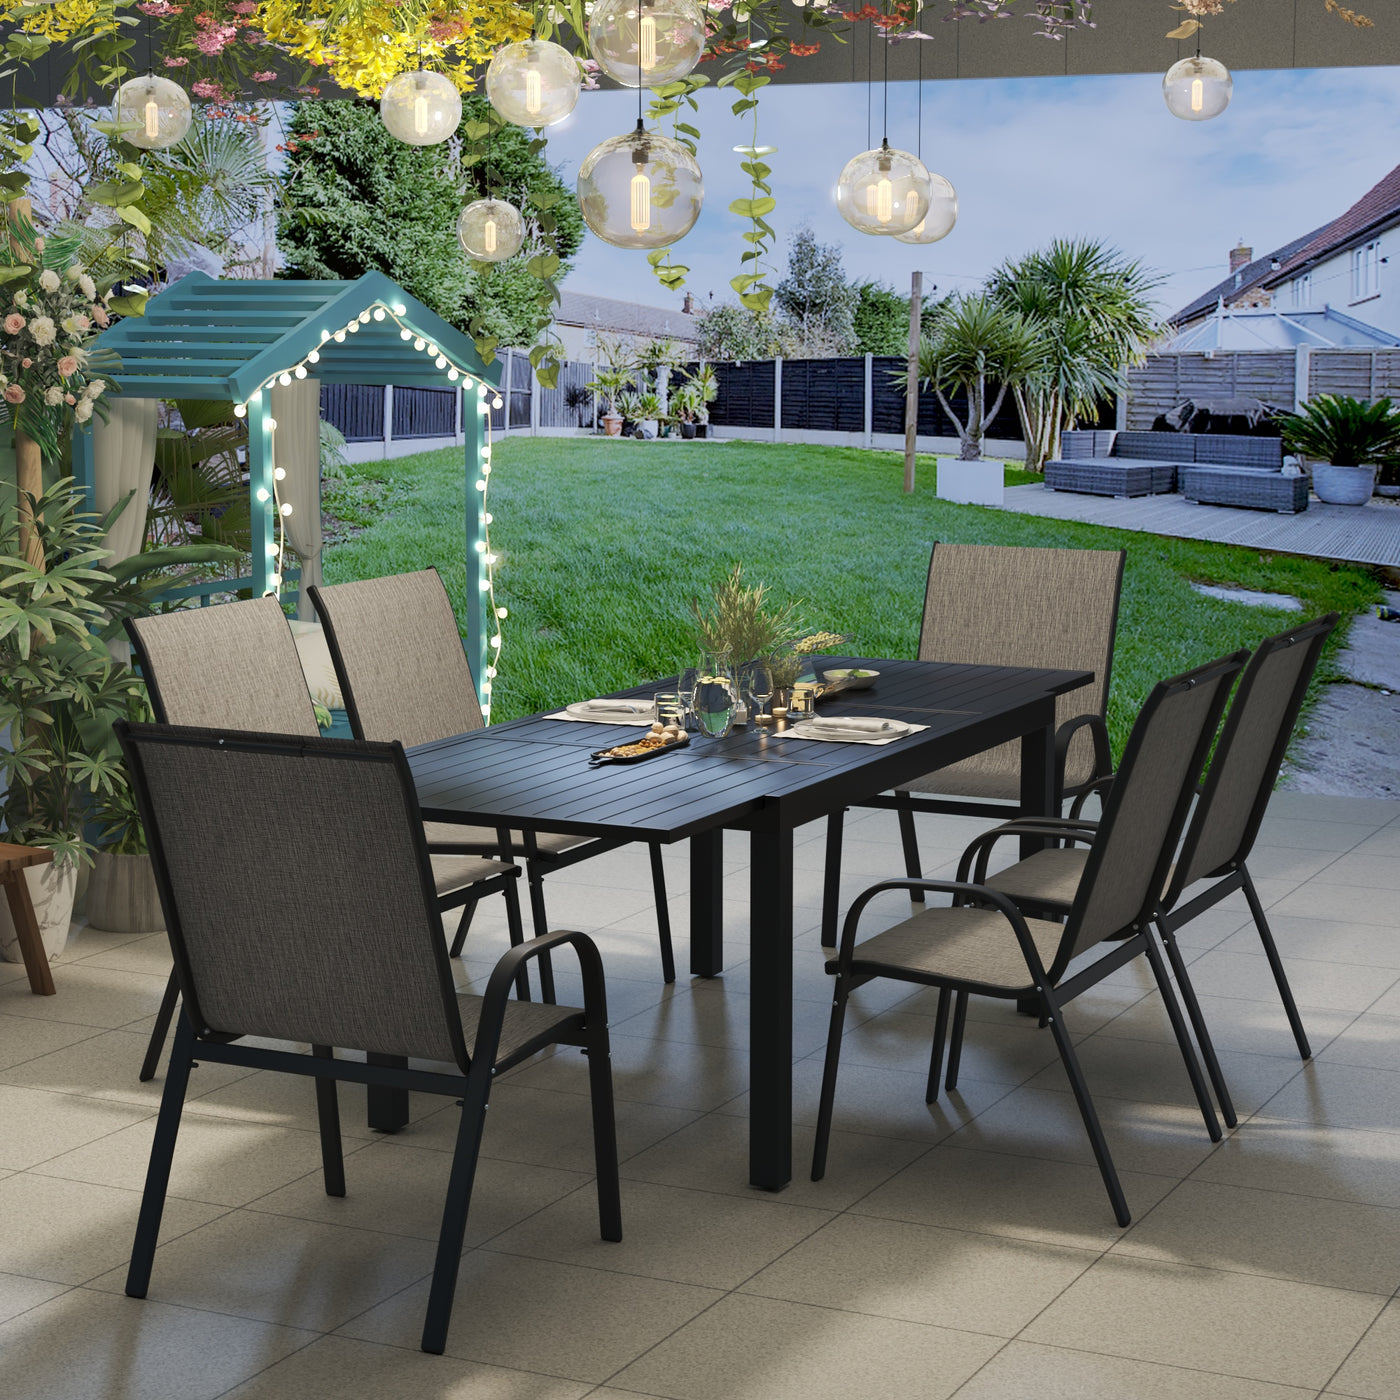 Outdoor dining area with a Pizzello Aluminum Patio Extendable Dining Table, string lights, and a garden gazebo in the background.